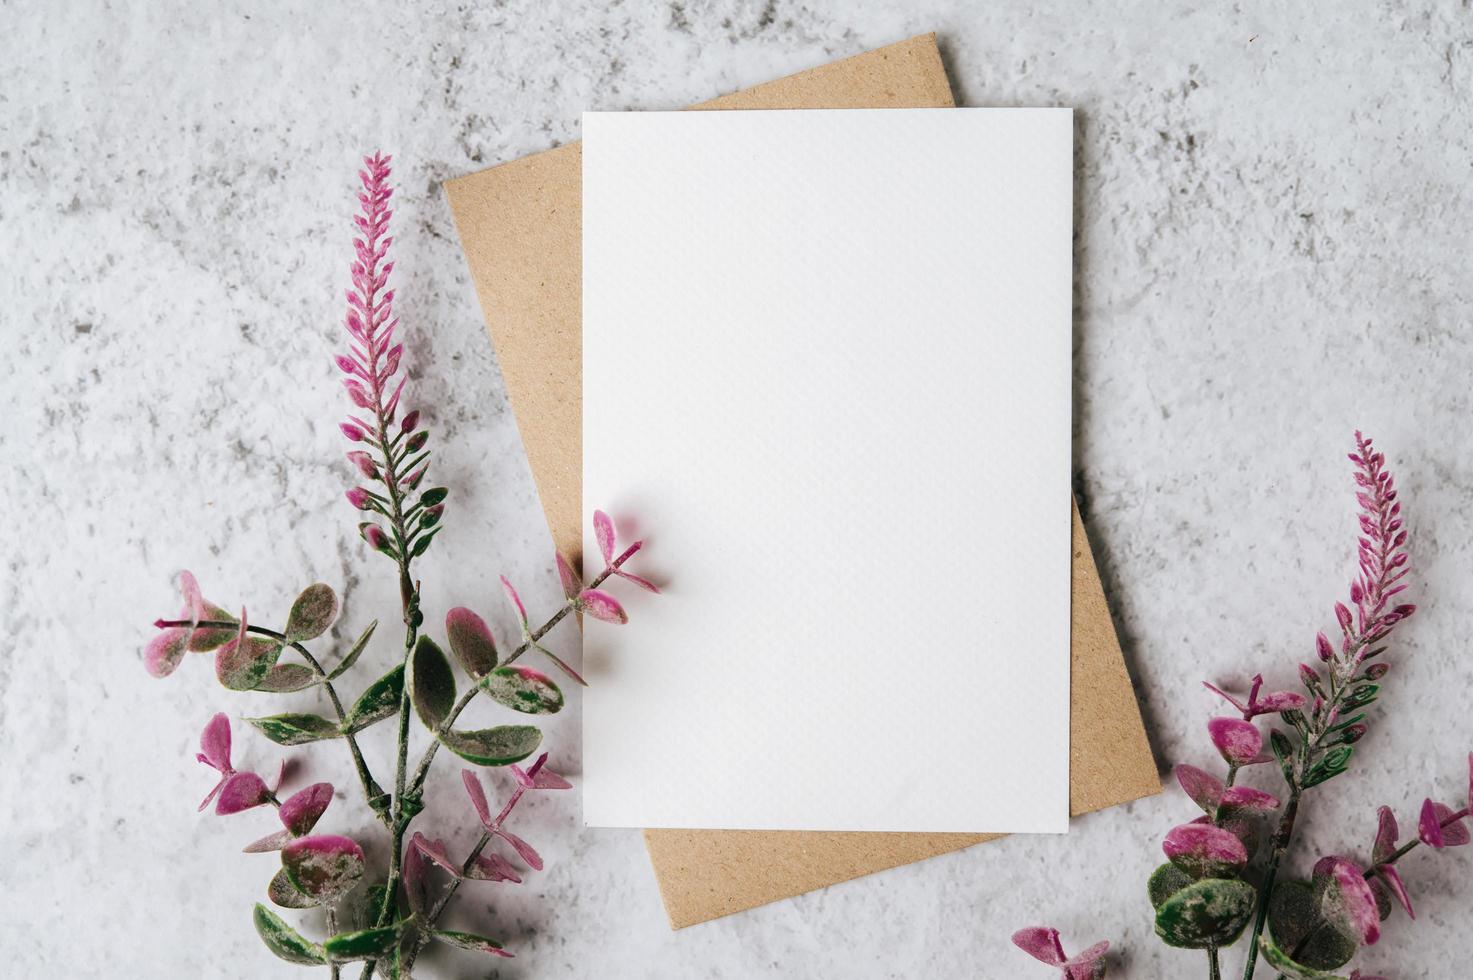 A blank card with envelope and flower is placed on white background photo